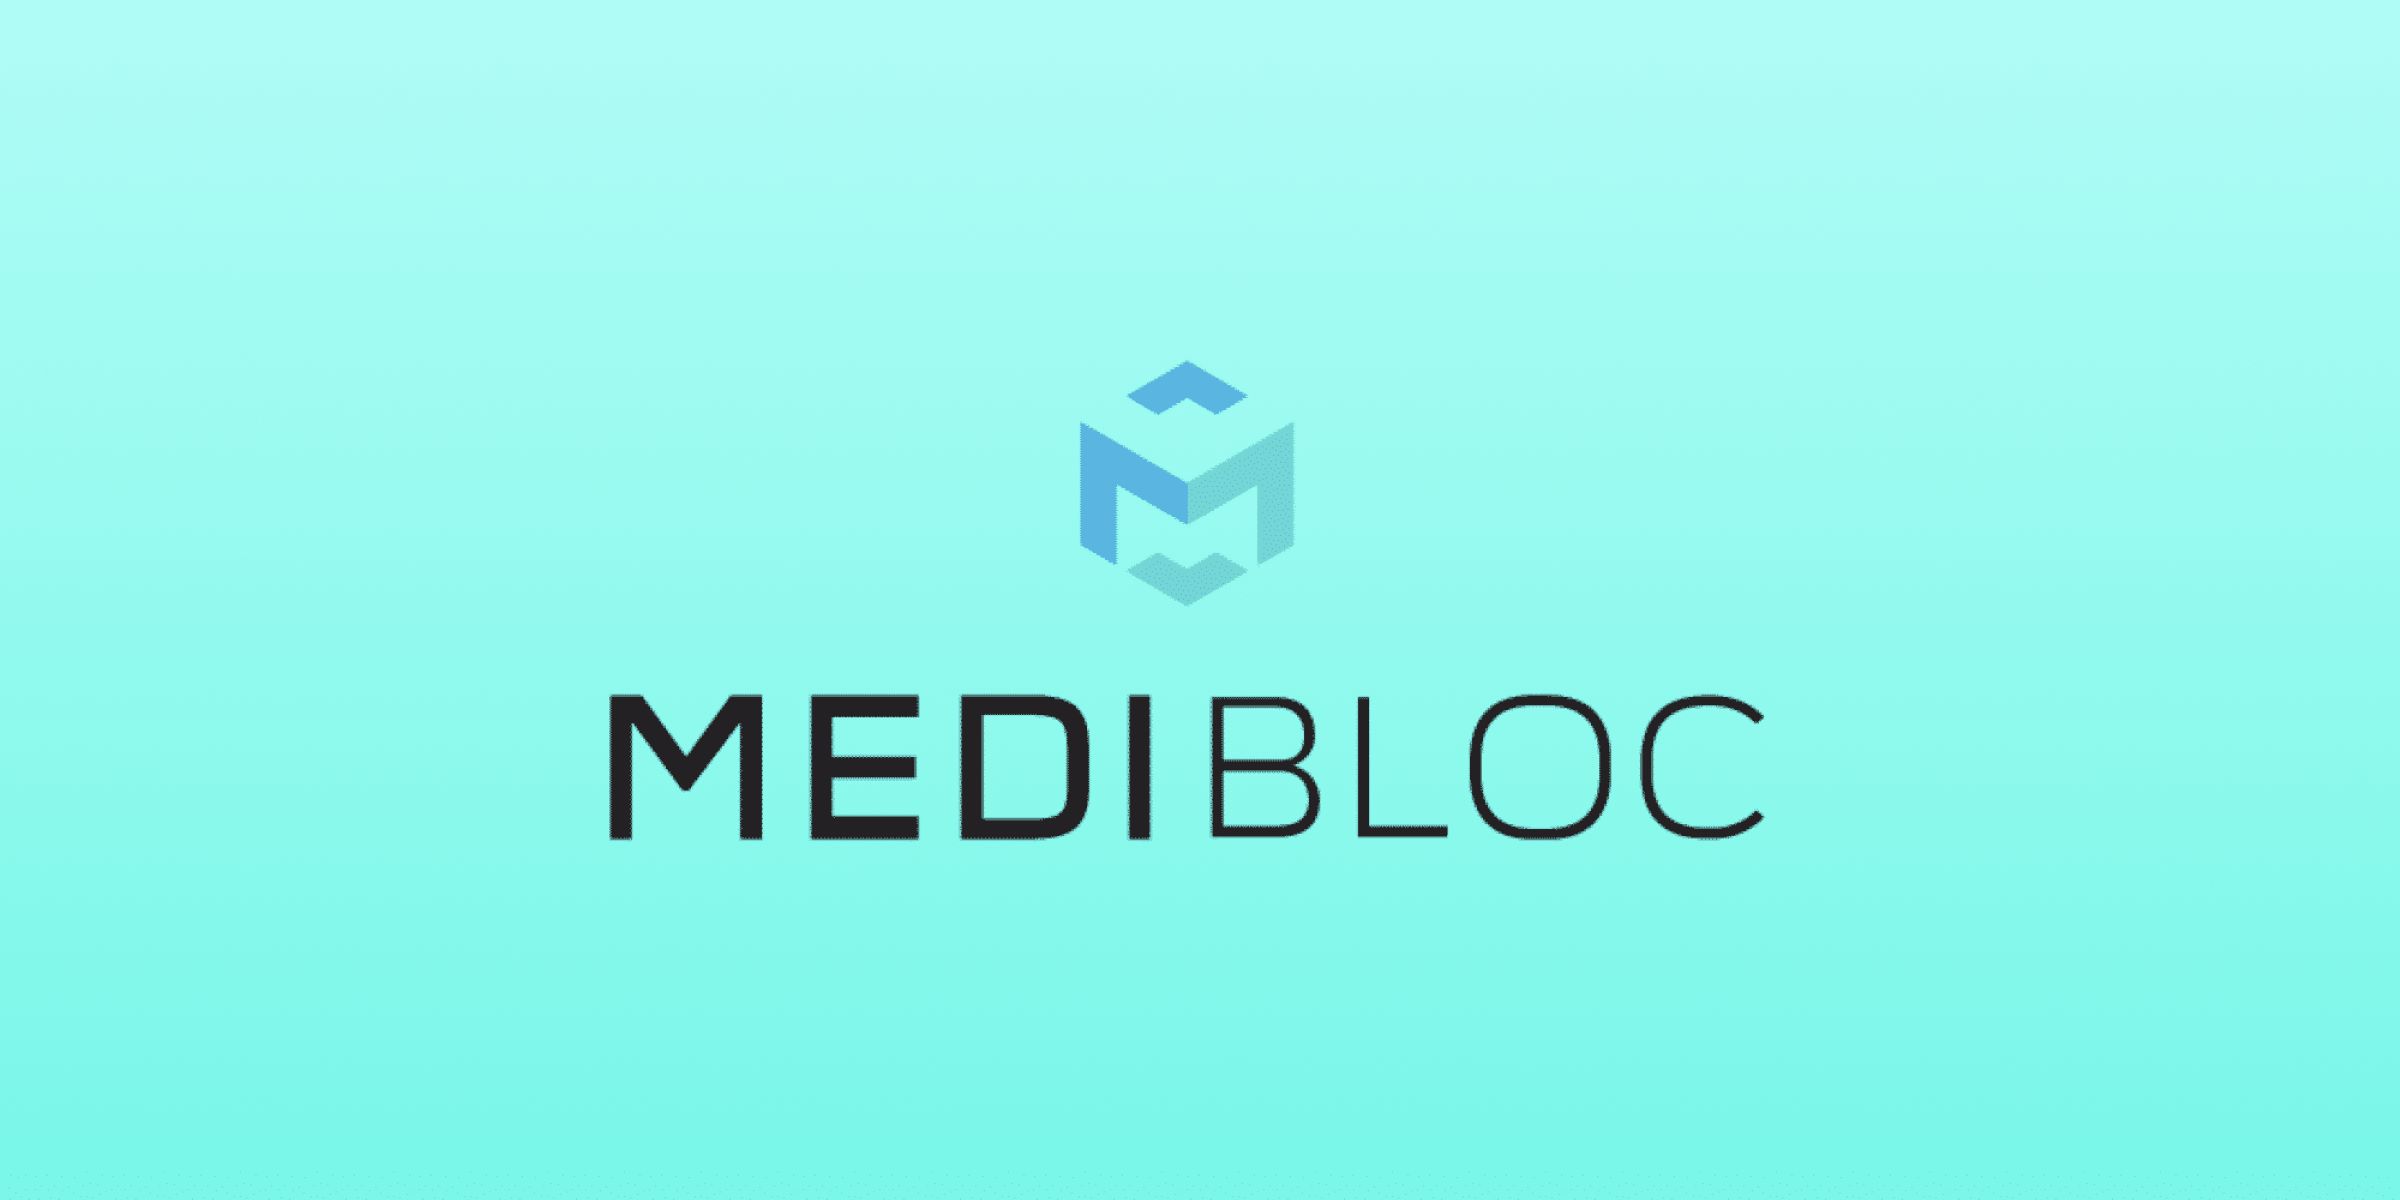 17-mind-blowing-facts-about-medibloc-med